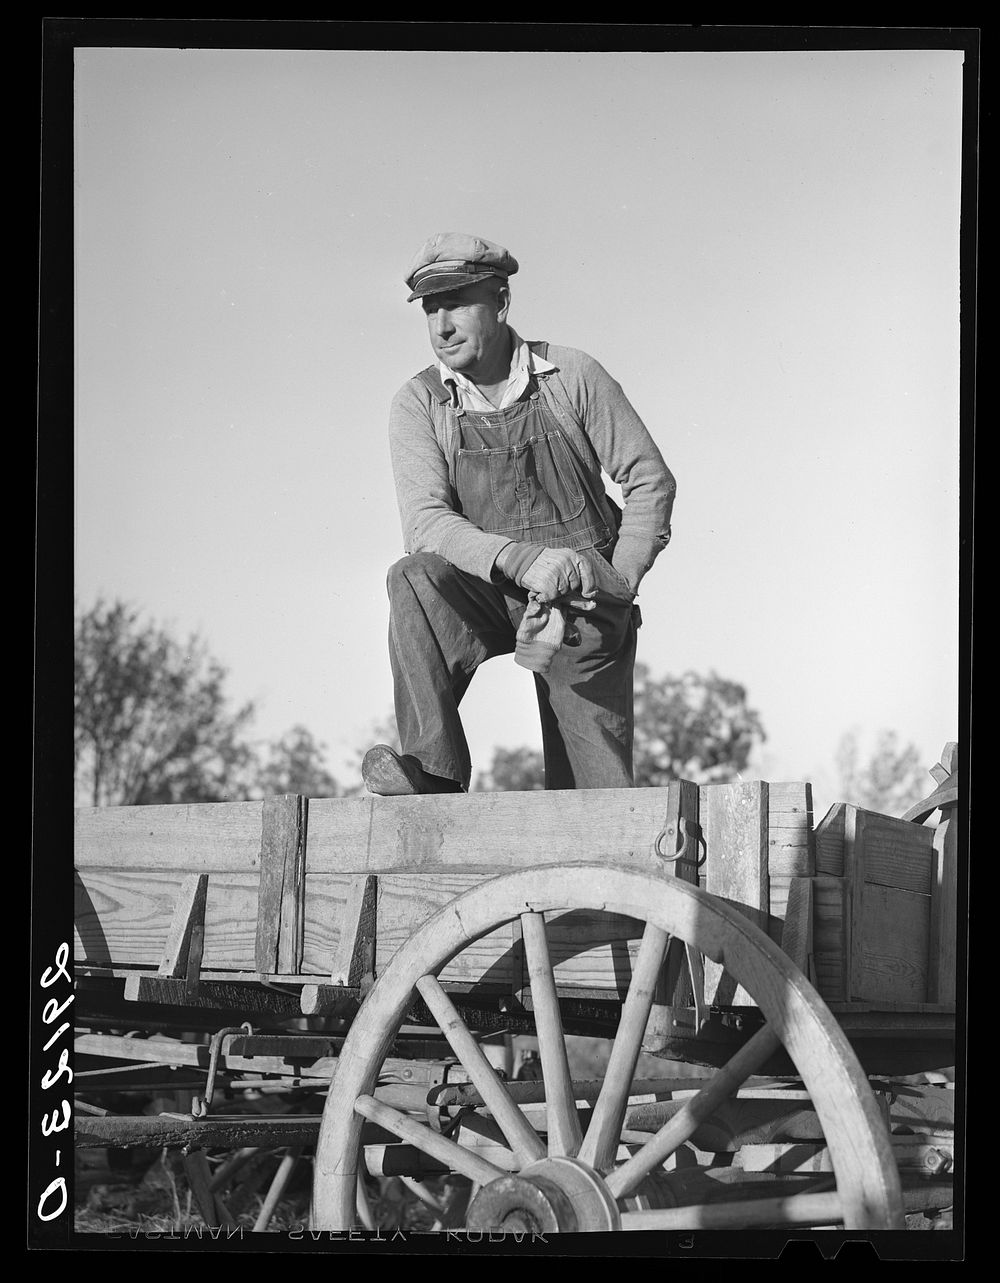 Lawrence Corda, tiff miner, raises corn, oats, and lespedeza when he is not working at the diggings." Washington County…